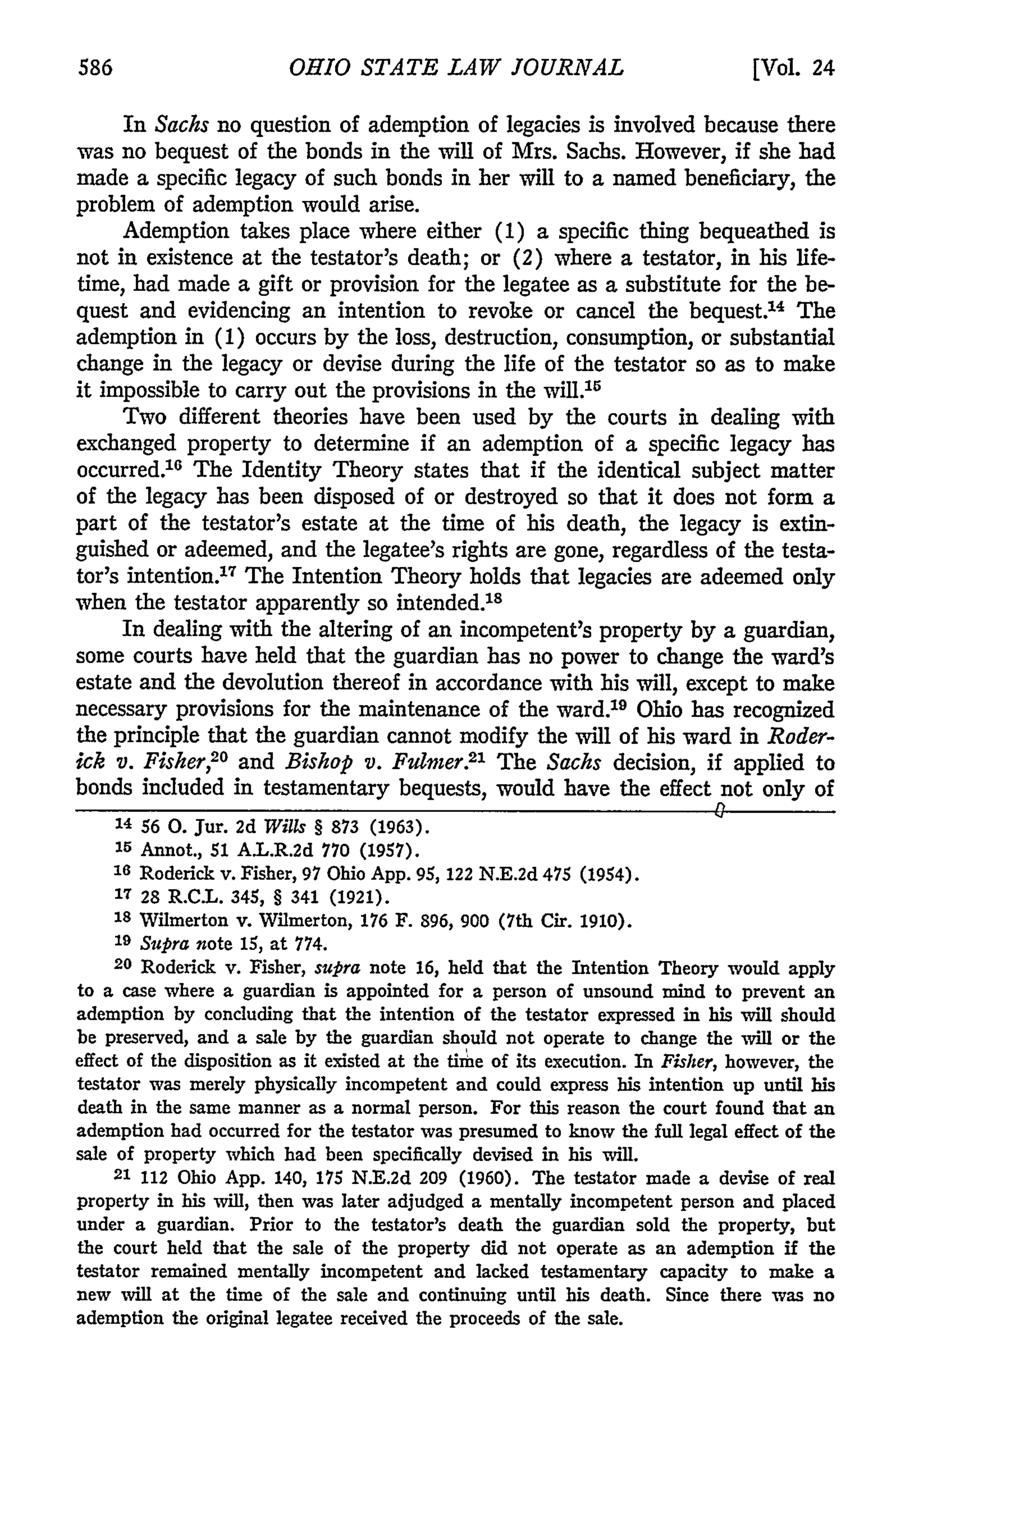 OHIO STATE LAW JOURNAL [Vol. 24 In Sachs no question of ademption of legacies is involved because there was no bequest of the bonds in the will of Mrs. Sachs. However, if she had made a specific legacy of such bonds in her will to a named beneficiary, the problem of ademption would arise.